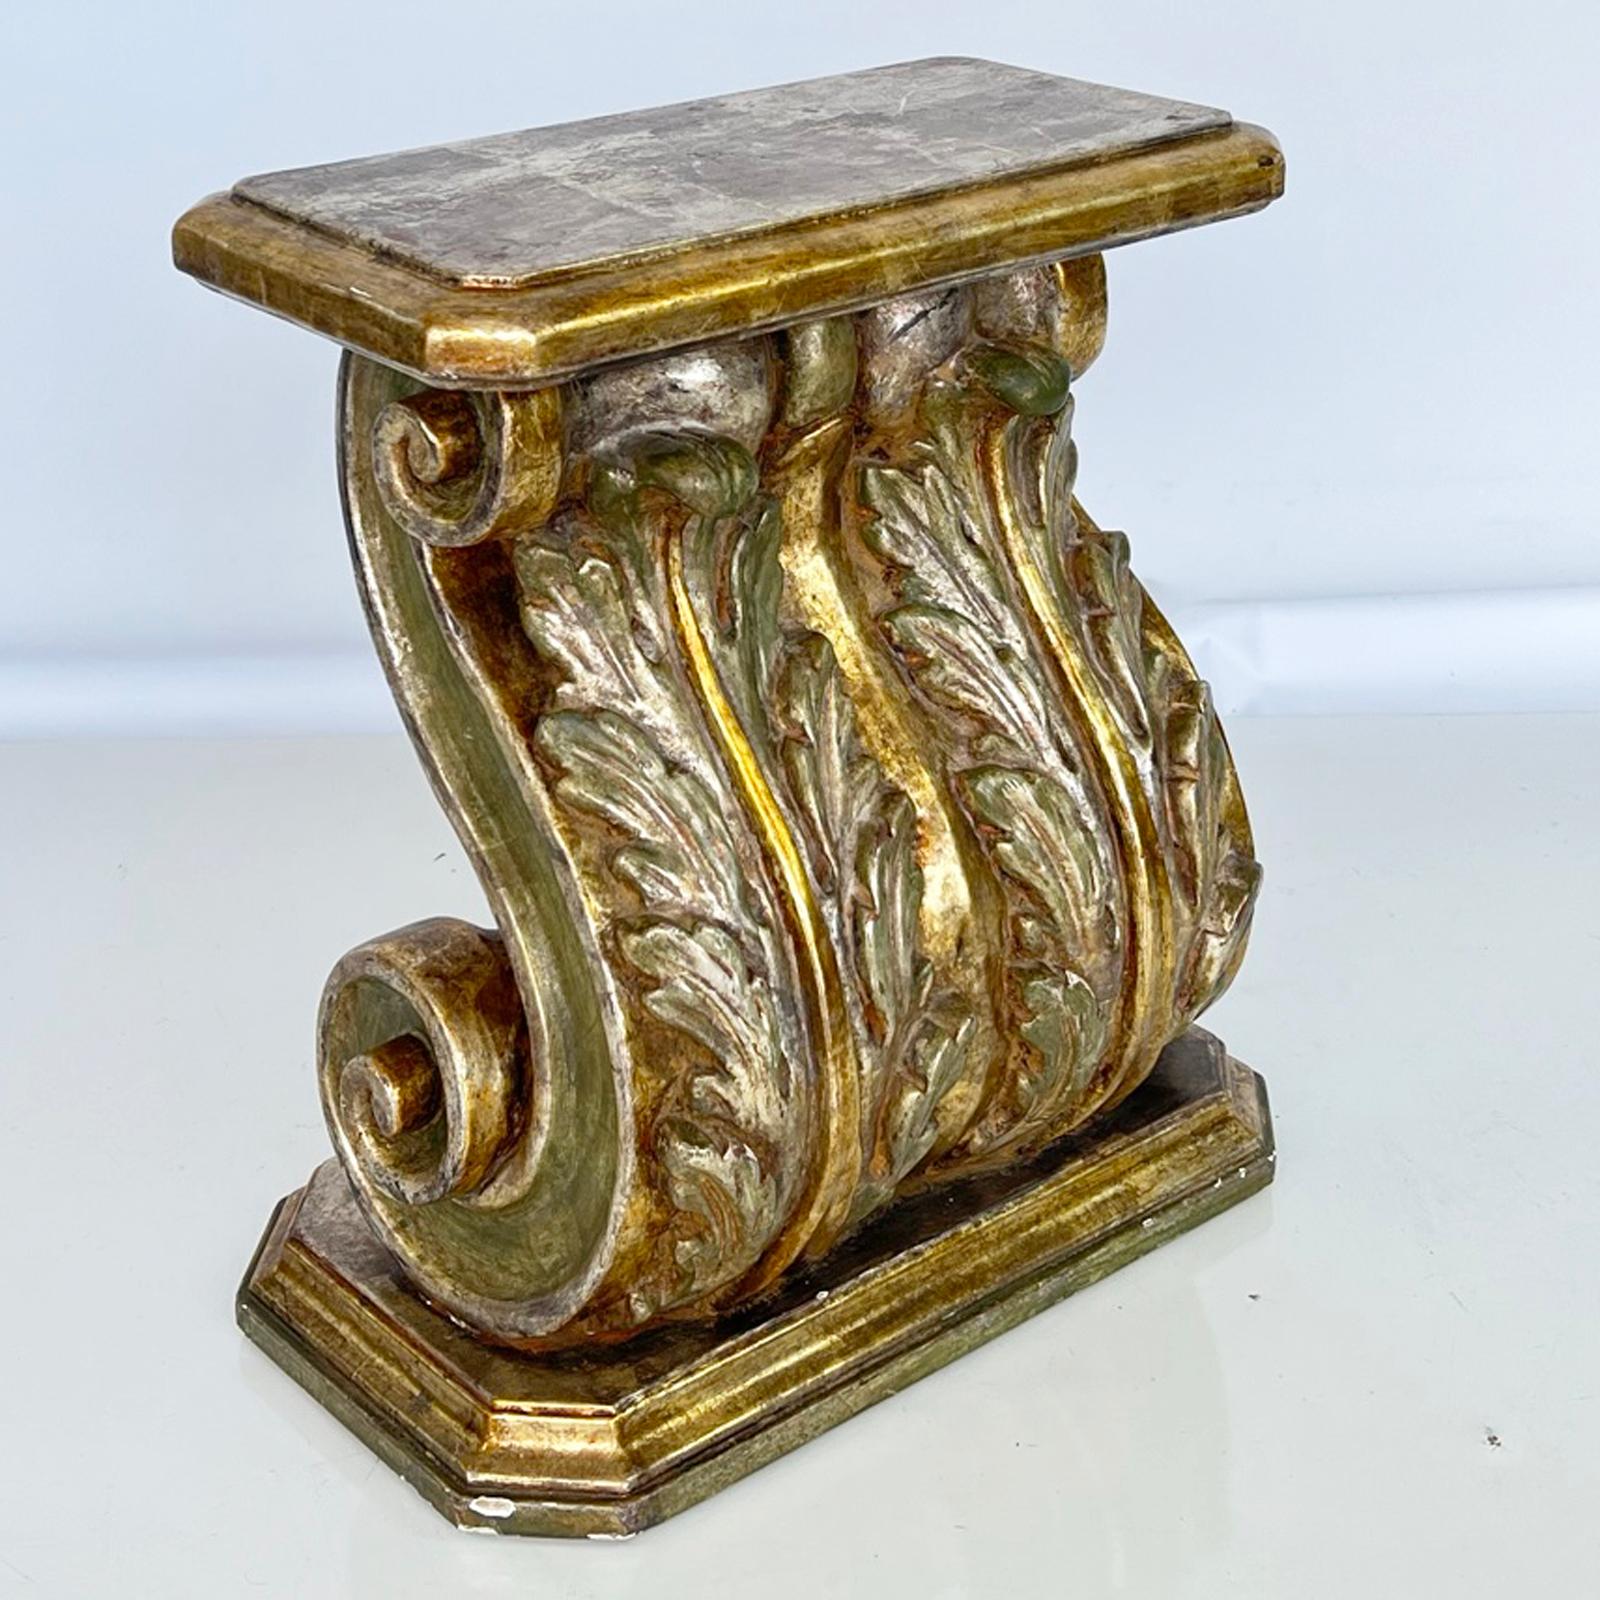 Neoclassical style side table, having a polychromed finish of silvergilt with gold and green glazing, over gessoed carved wood; its rectangular top on exaggerated S-scroll, corbel base, carved with acanthus leaves, on a conforming, graduated plinth